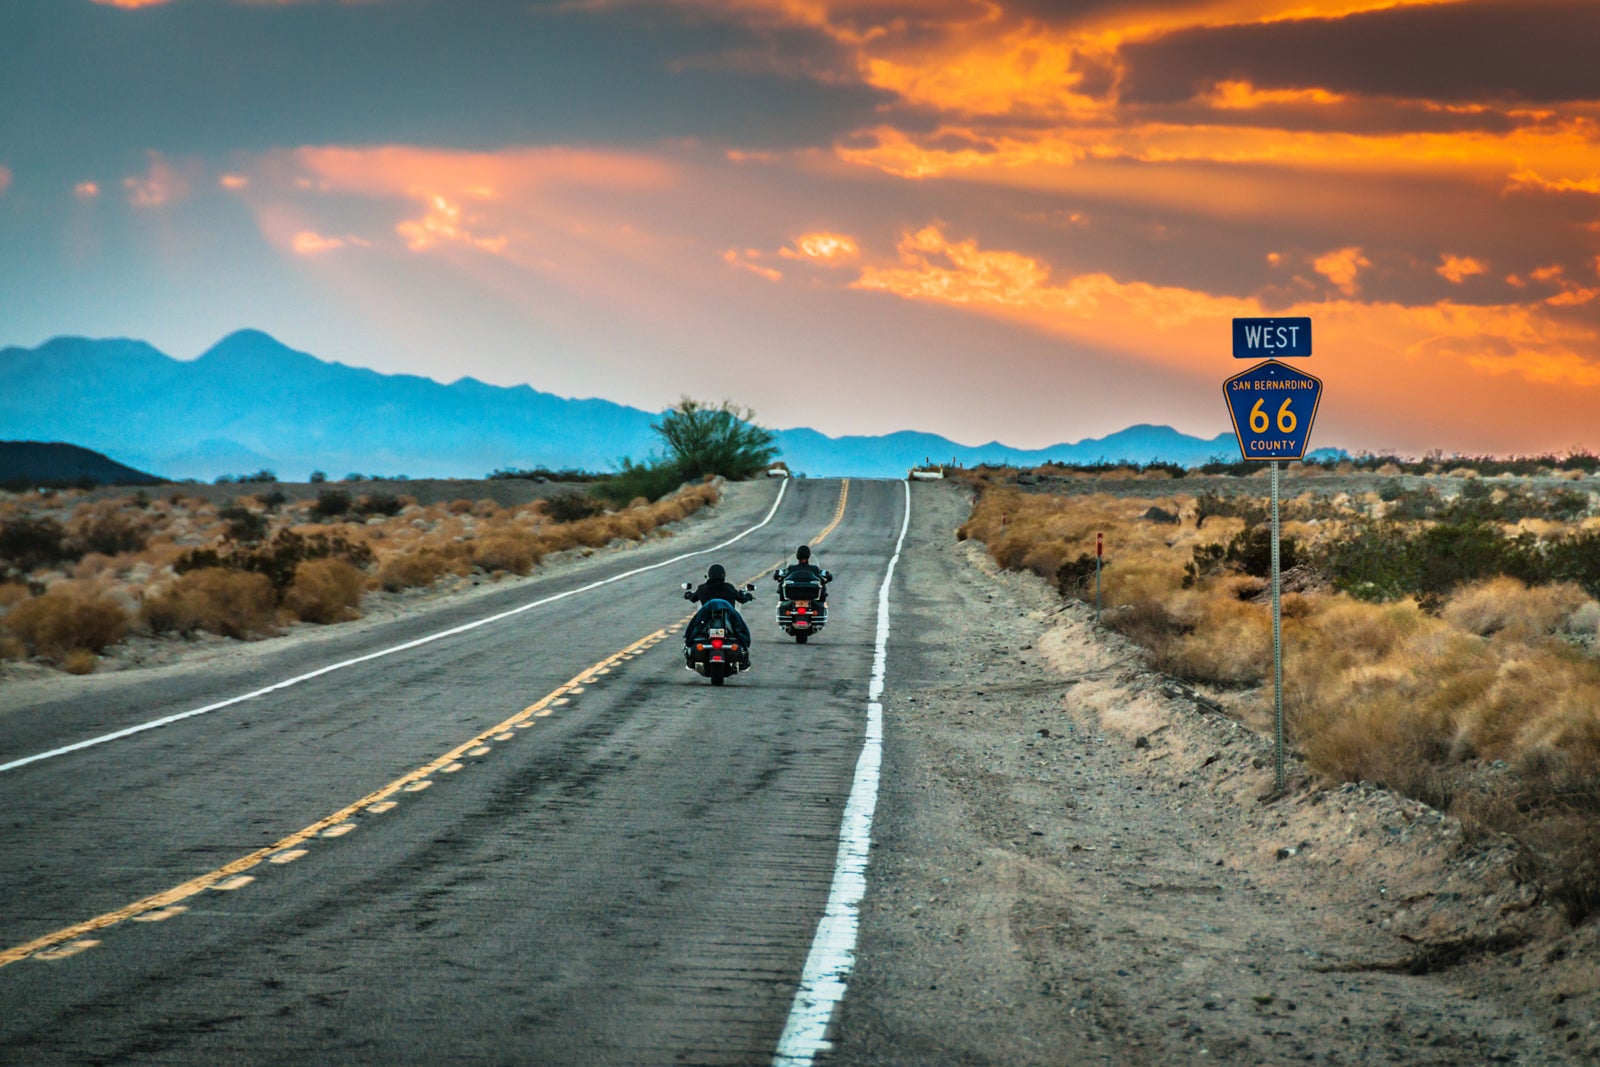 Route 66 road-trip planner: The best stops along the way - The Points Guy.